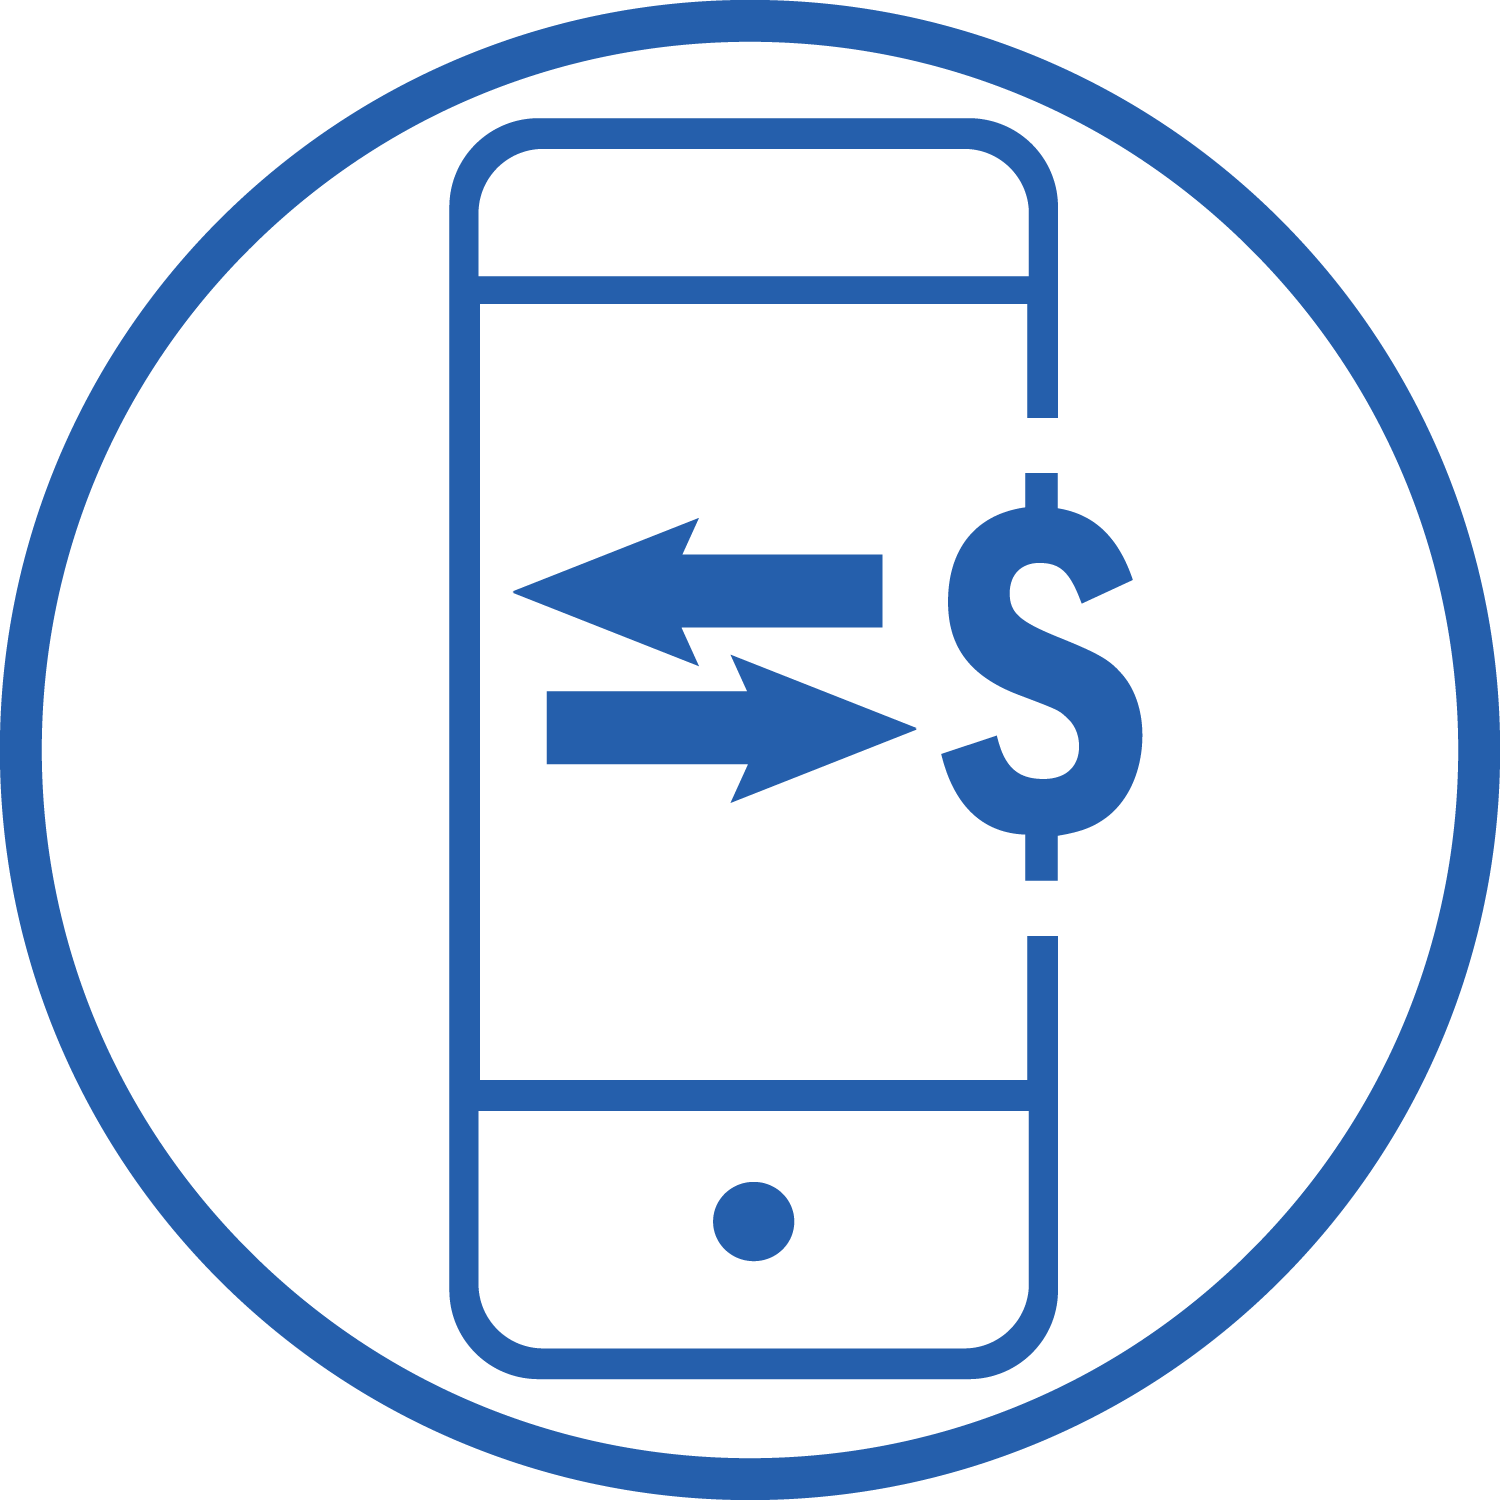 Phone Icon with Arrows and Dollar Sign inside of Larger Blue Circle